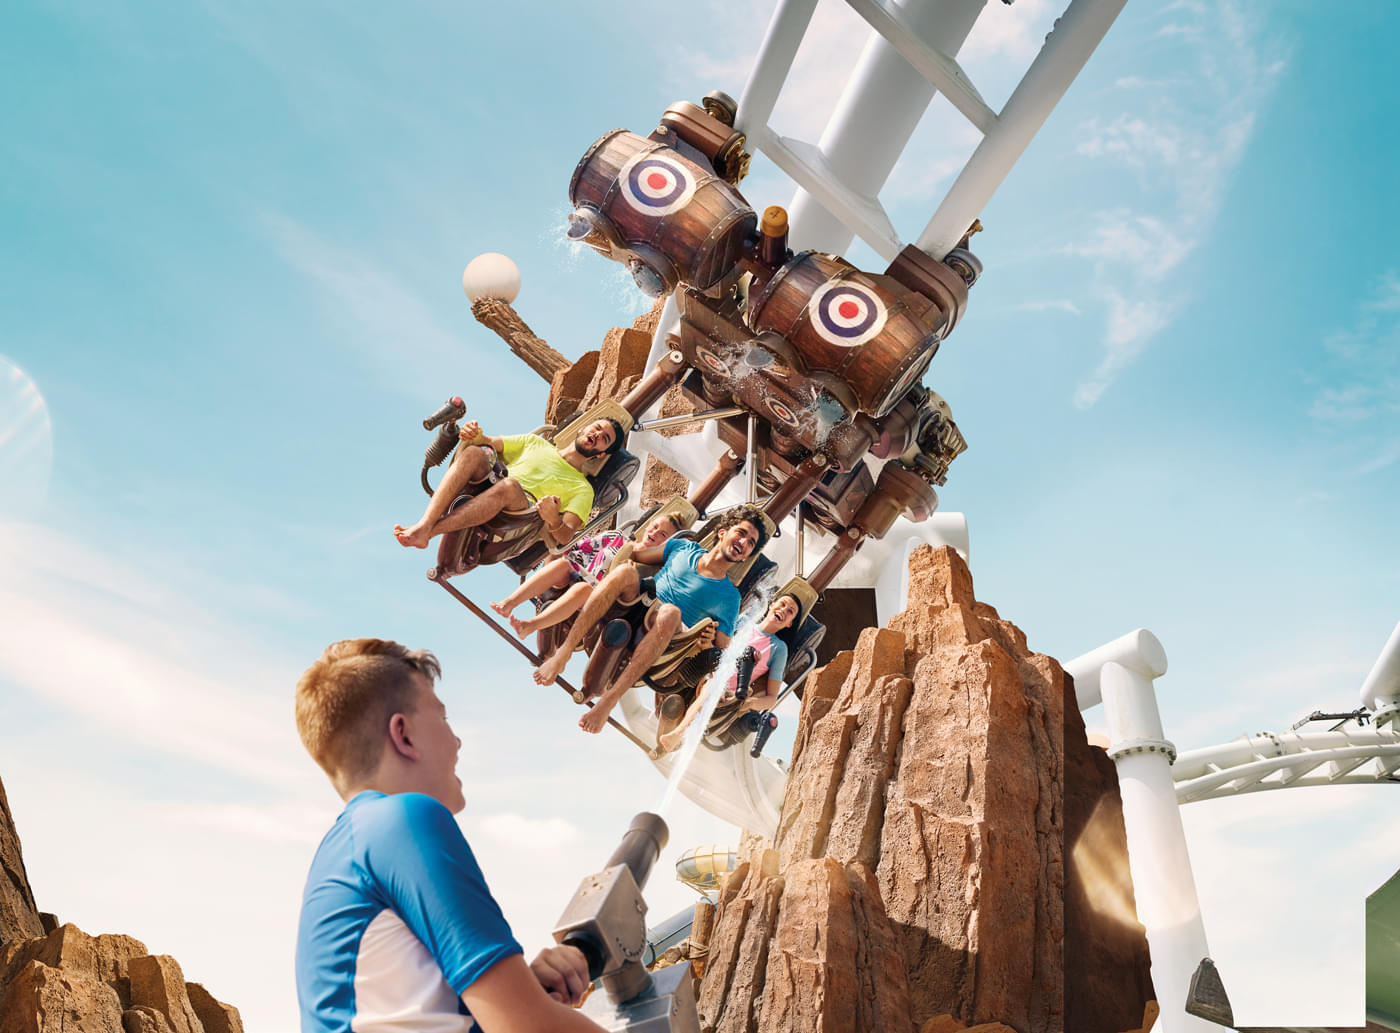 Go around the park on the Middle East’s longest suspended rollercoaster